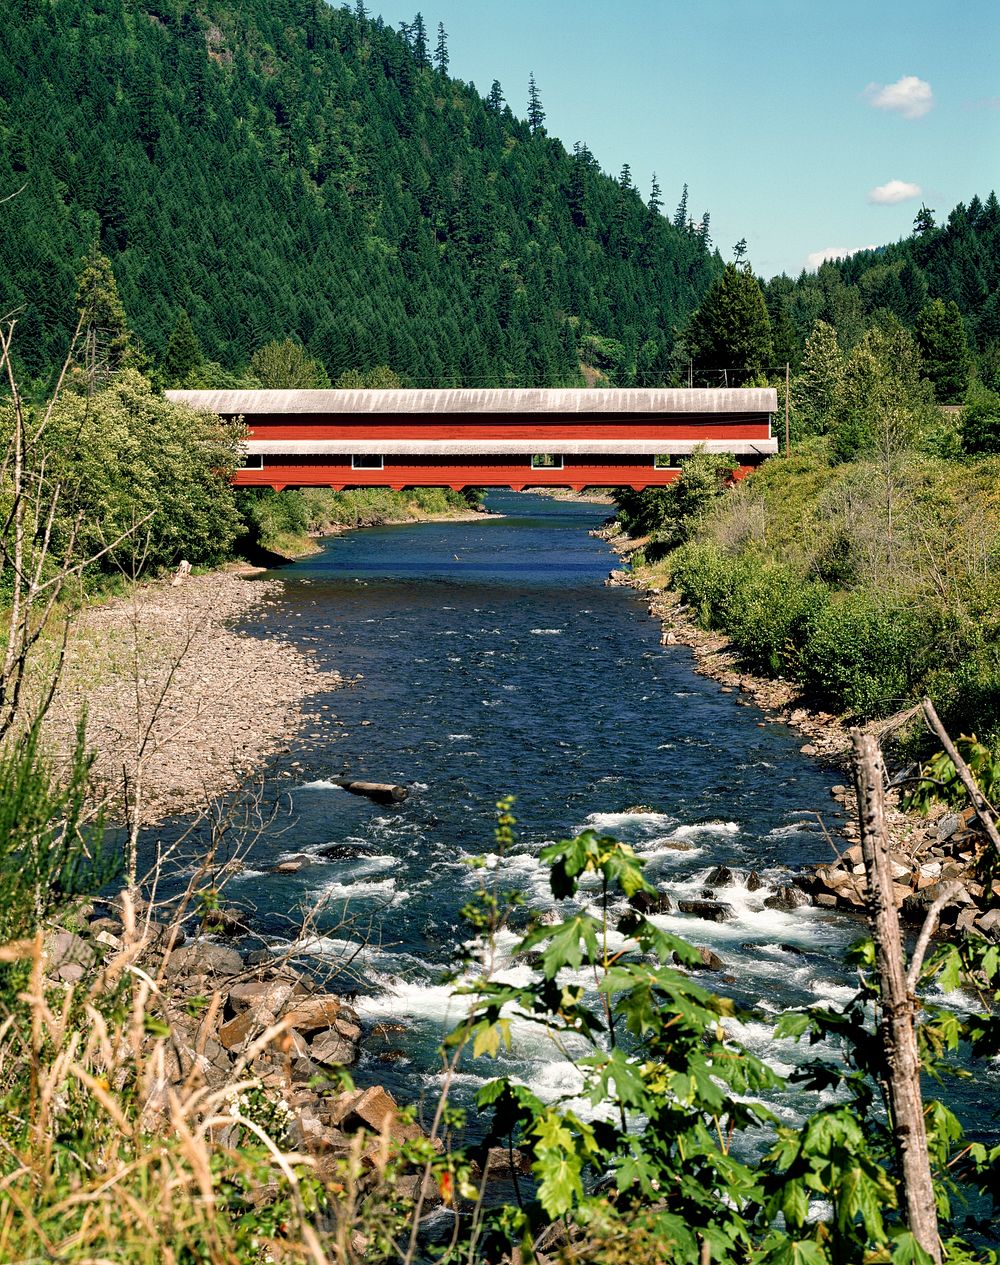 The Office Bridge in Lane County, Oregon. Original image from Carol M. Highsmith&rsquo;s America, Library of Congress…